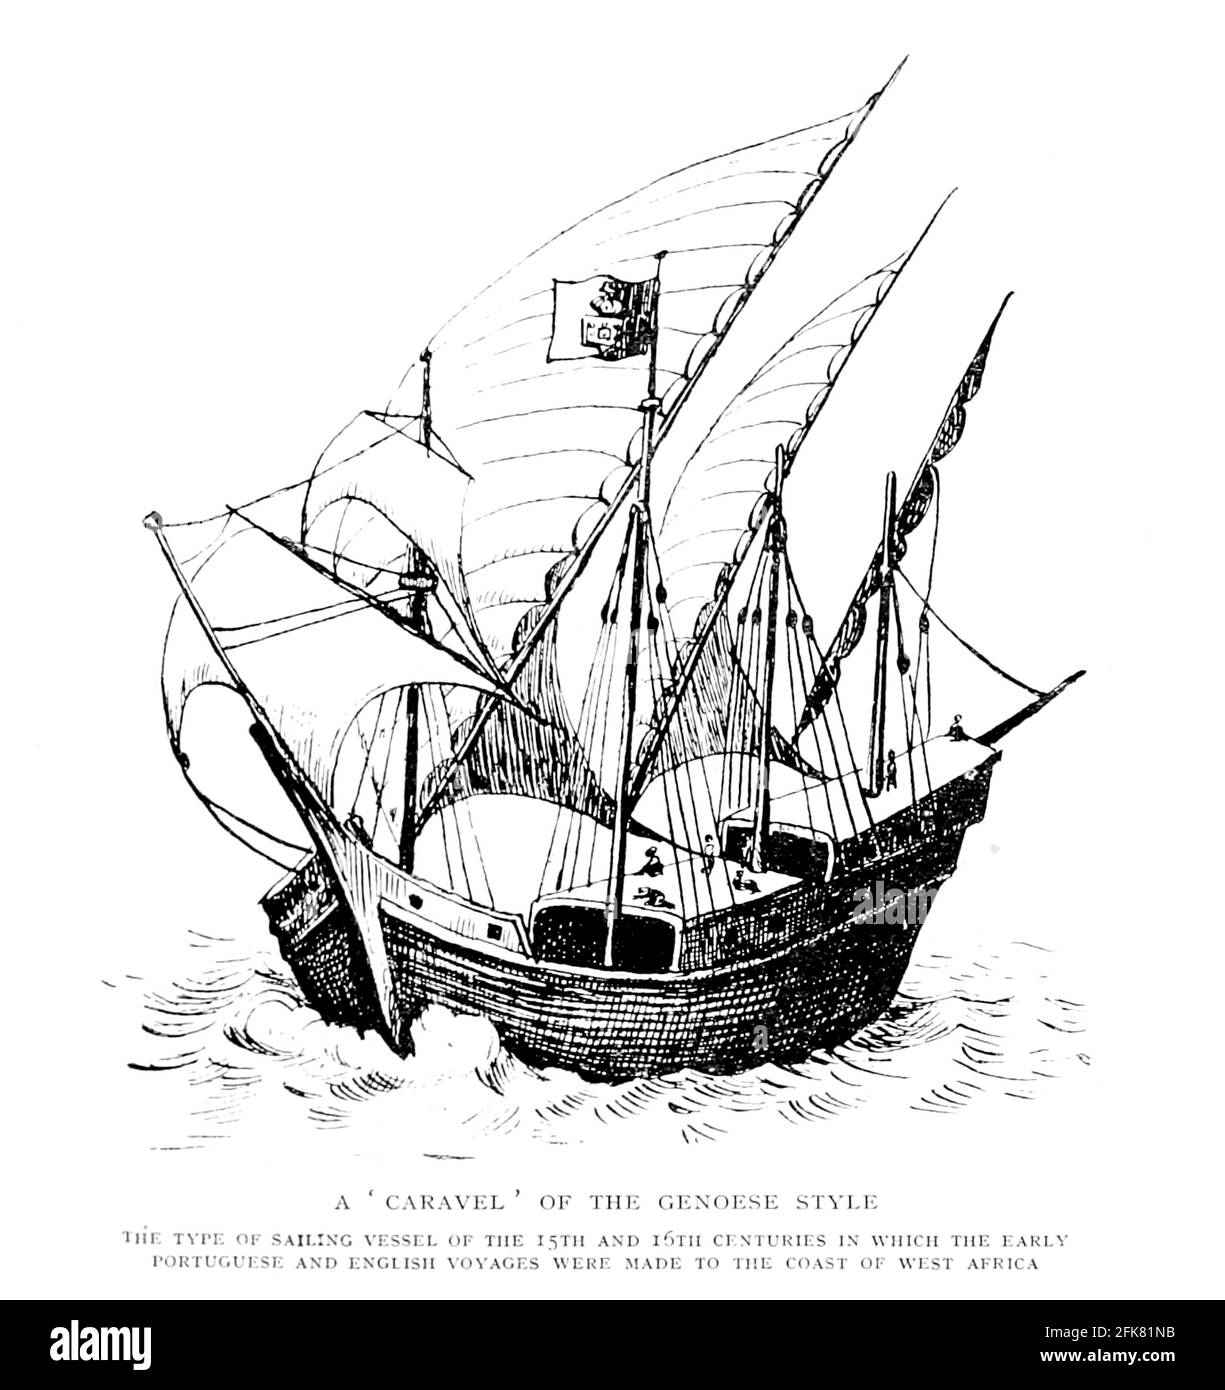 A ' Caravel ' Of The Genoese 15th-16th century Style From the Book '  Britain across the seas : Africa : a history and description of the British Empire in Africa ' by Johnston, Harry Hamilton, Sir, 1858-1927 Published in 1910 in London by National Society's Depository Stock Photo